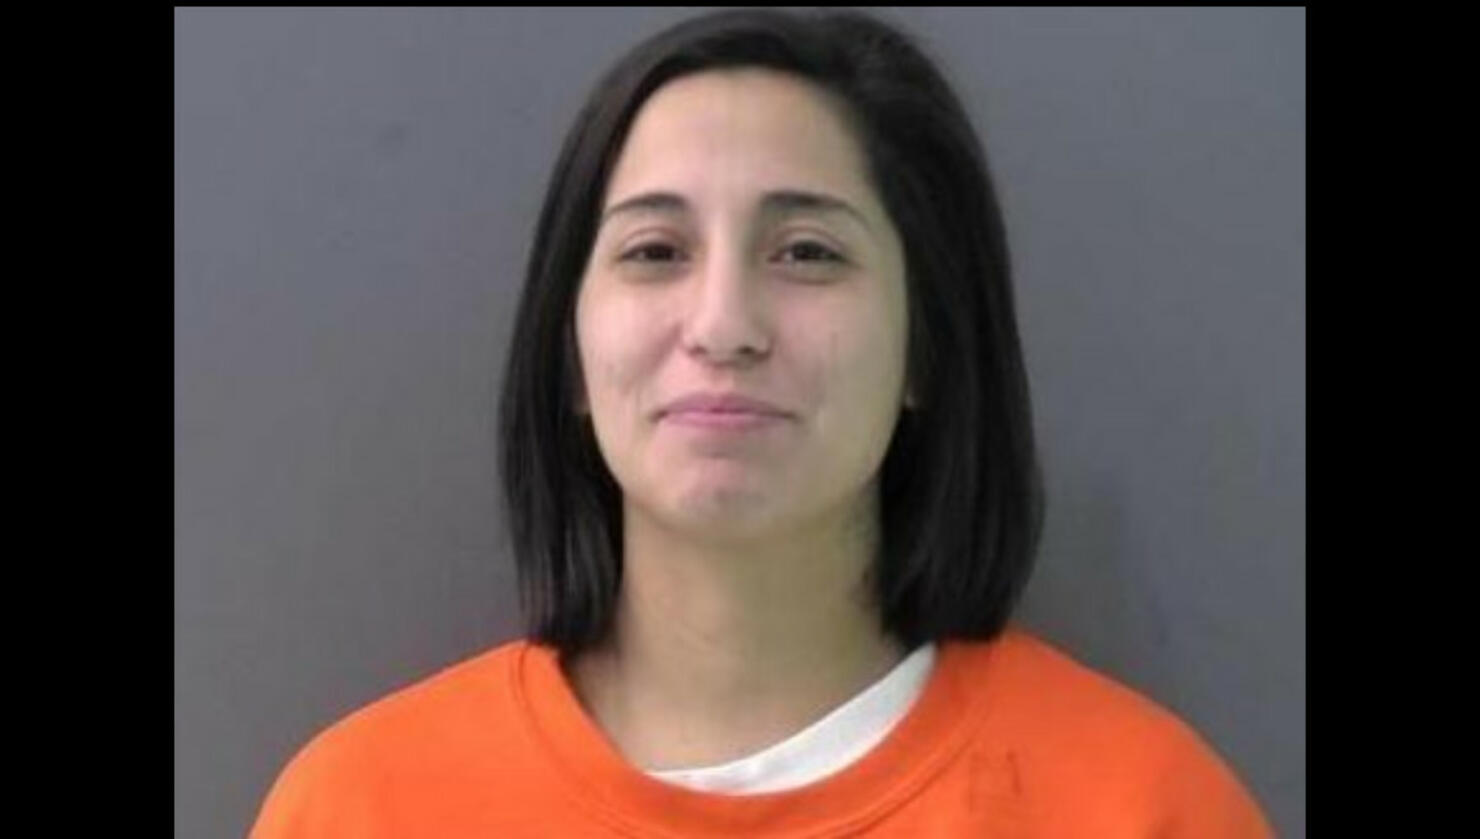 Bismarck woman arrested for trespassing | Local news for 